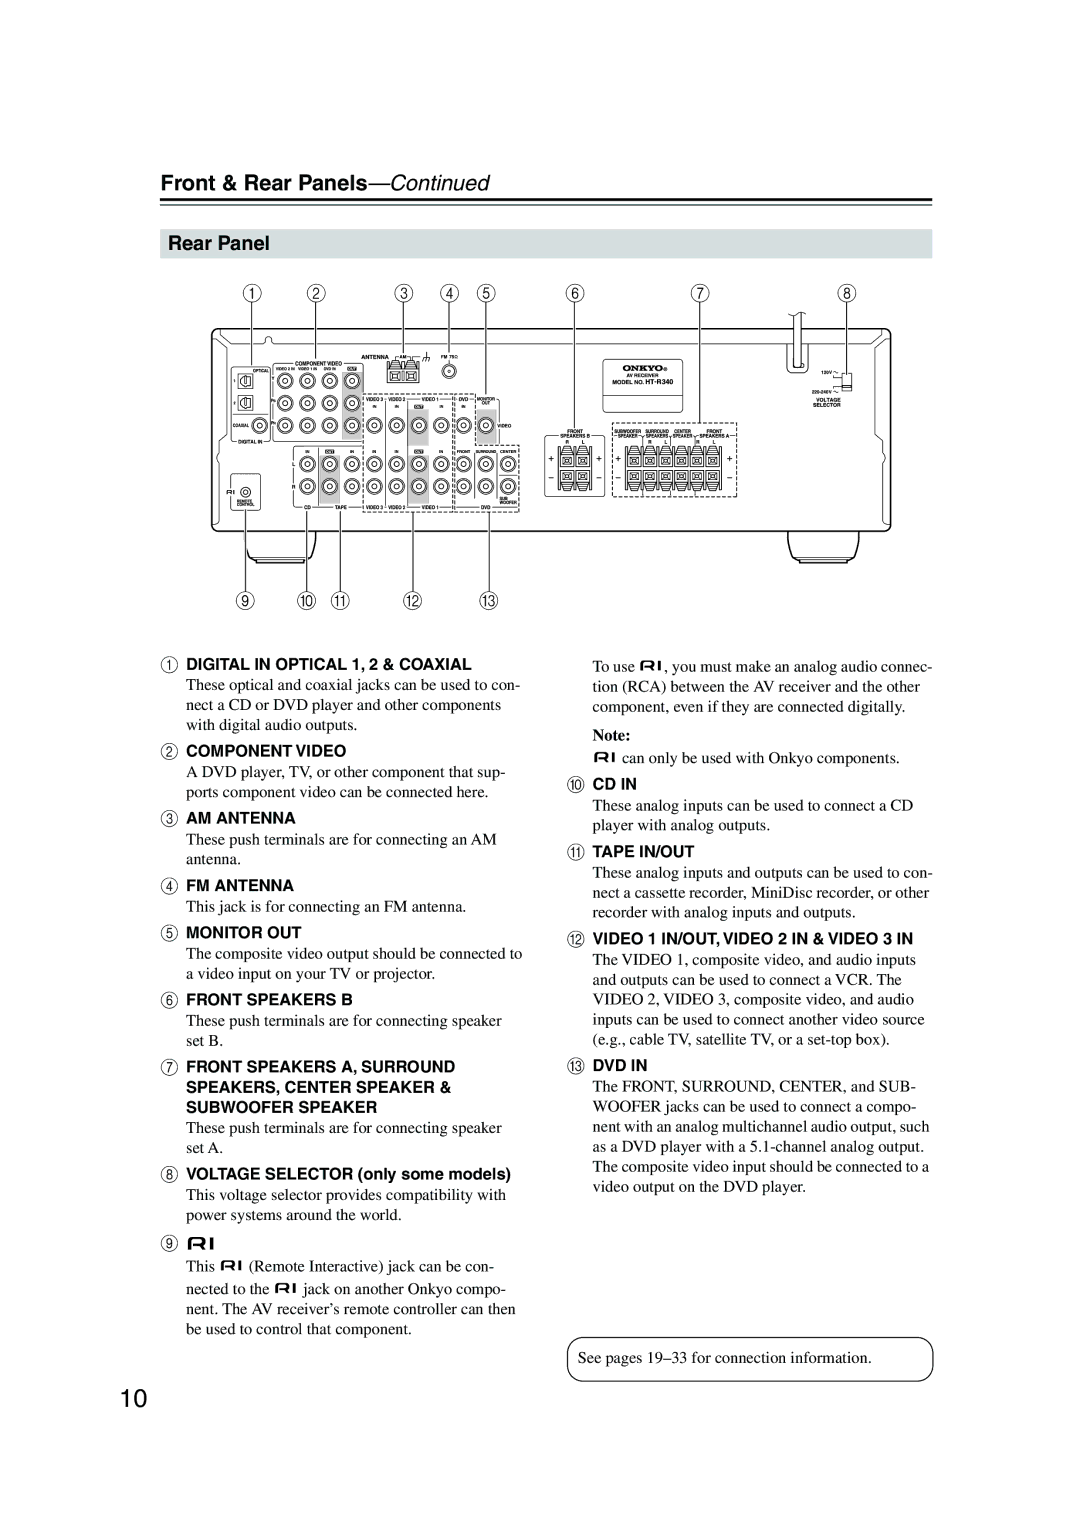 Onkyo HT-S590 instruction manual Rear Panel, Voltage Selector only some models 